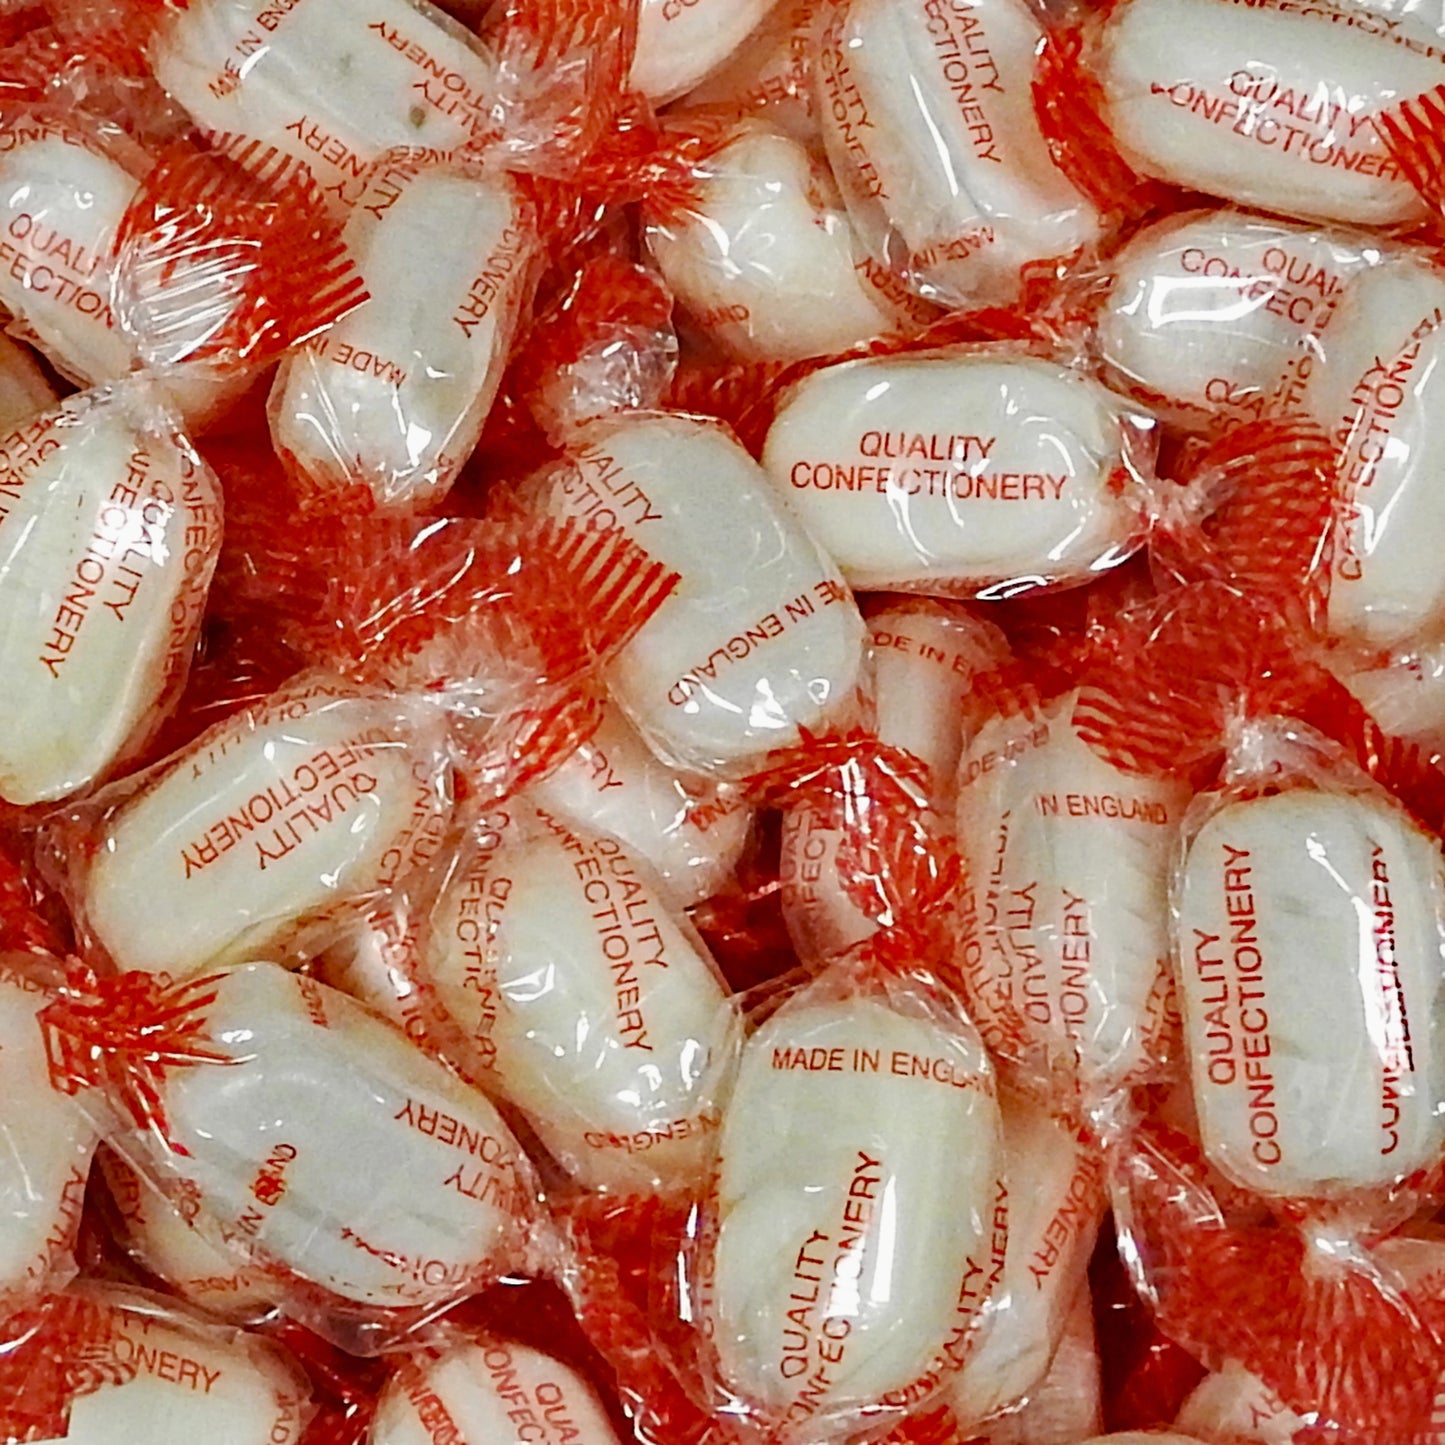 Old English Mints - Retro Sweets at The Sweetie Jar